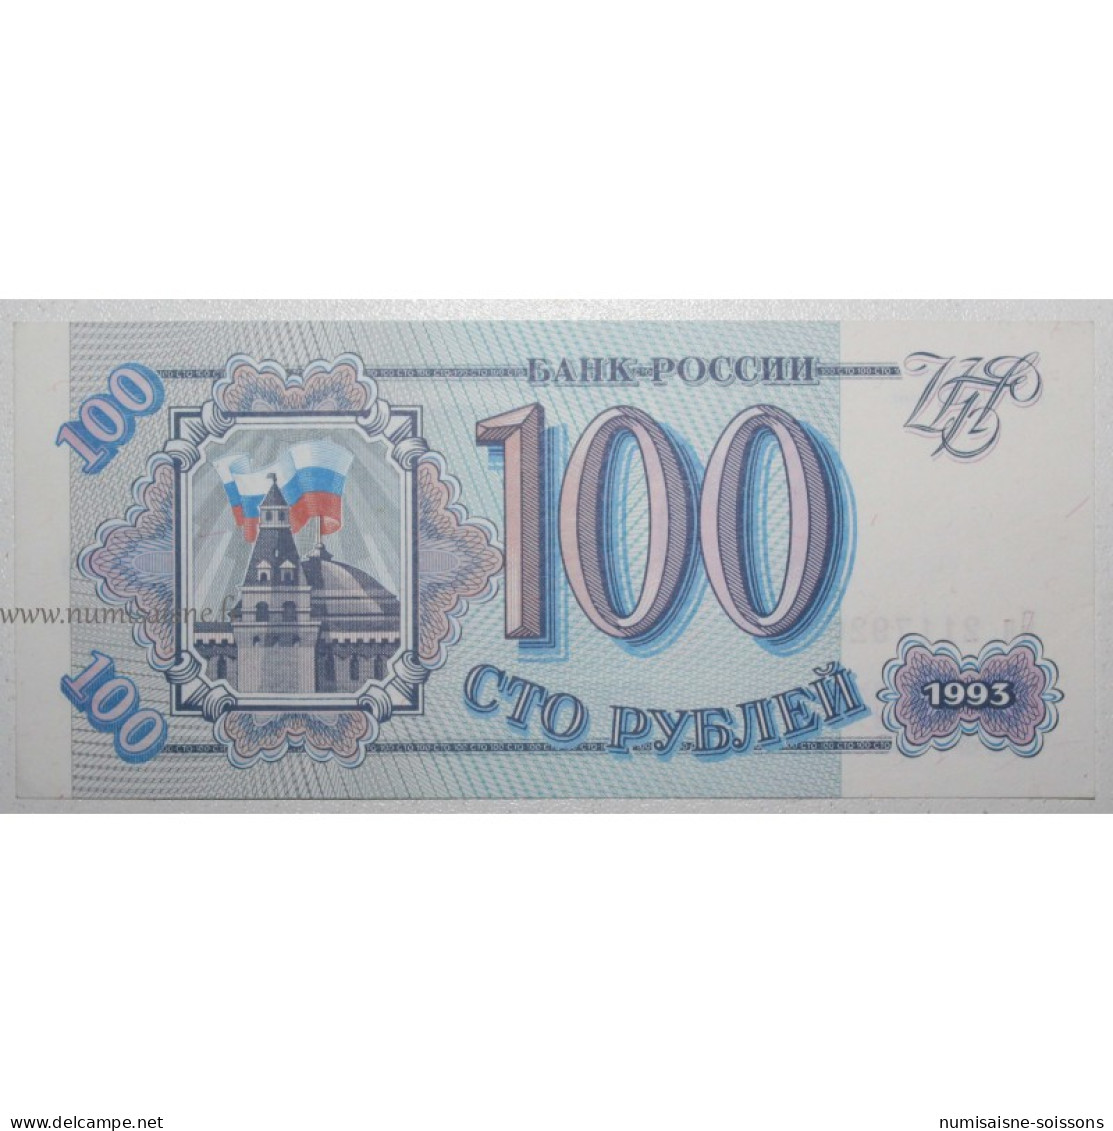 RUSSIE - PICK 254 - 100 ROUBLES 1993 - Russia